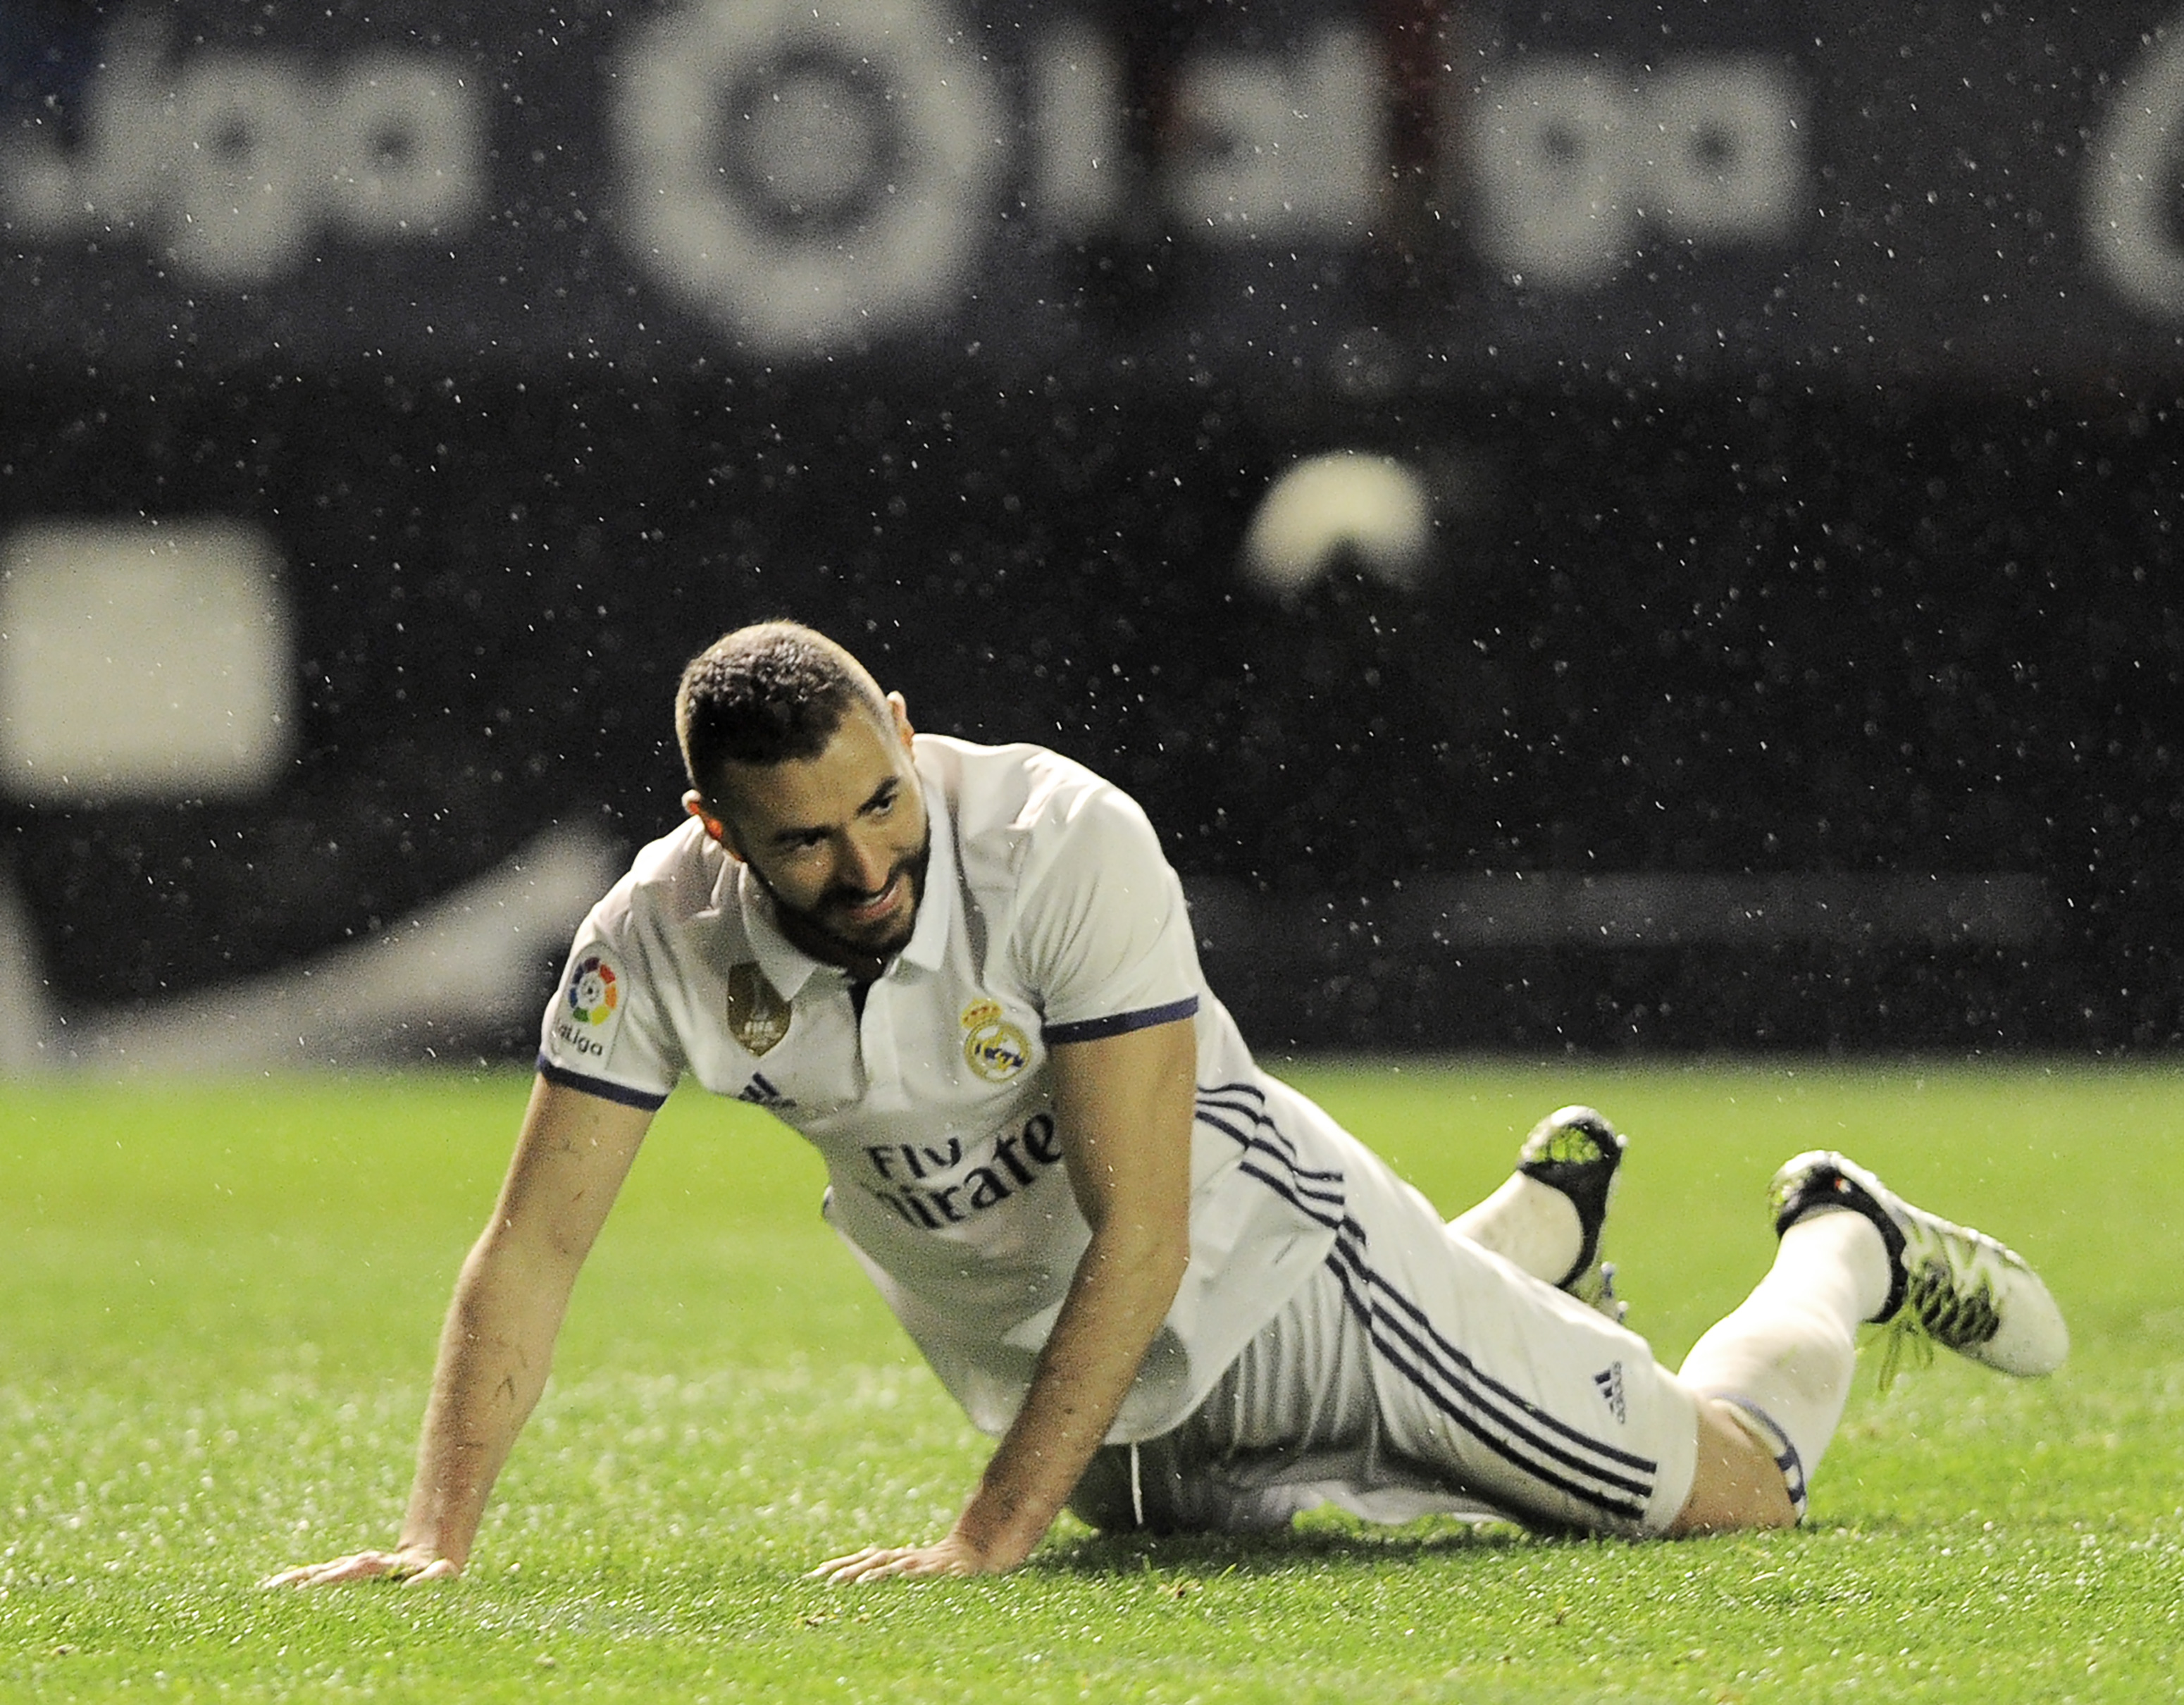 Real Madrid's French forward Karim Benzema lies on the ground during the Spanish league football match CA Osasuna vs Real Madrid CF at El Sadar stadium in Pamplona on February 11, 2017. / AFP / ANDER GILLENEA        (Photo credit should read ANDER GILLENEA/AFP/Getty Images)